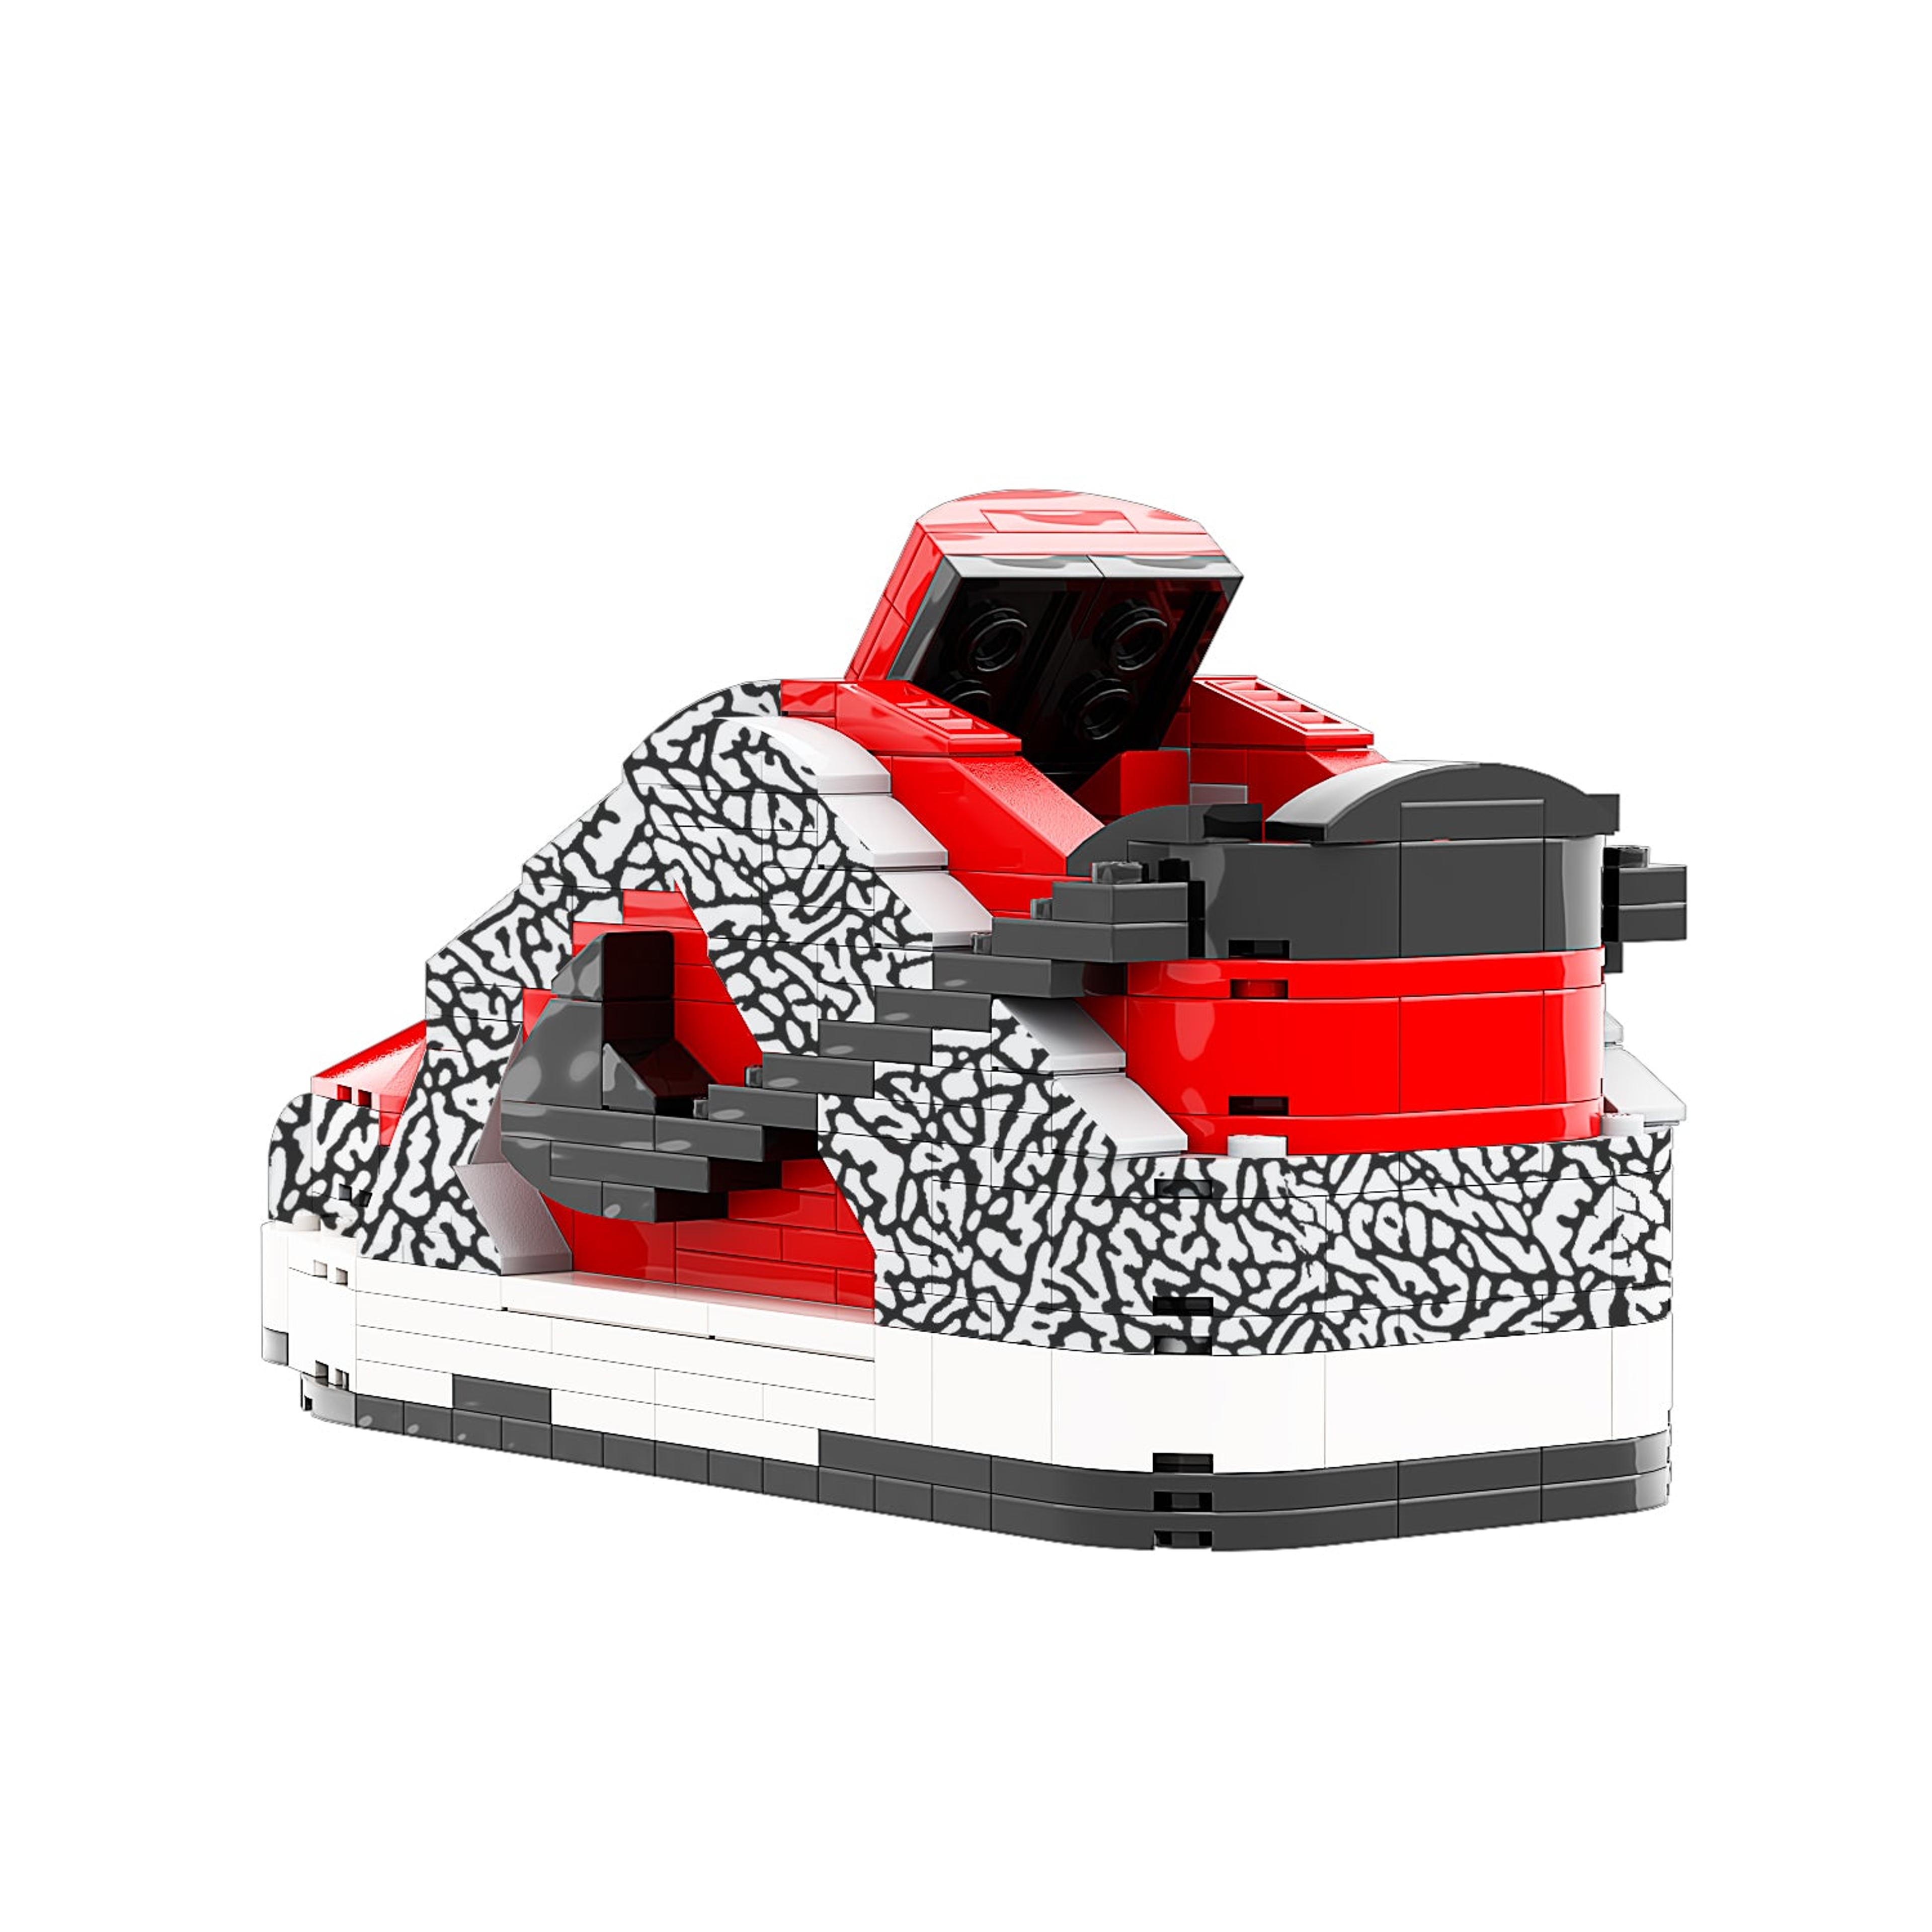 Alternate View 3 of REGULAR SB Dunk SUP "Red Cement" Sneaker Bricks with Mini Figure